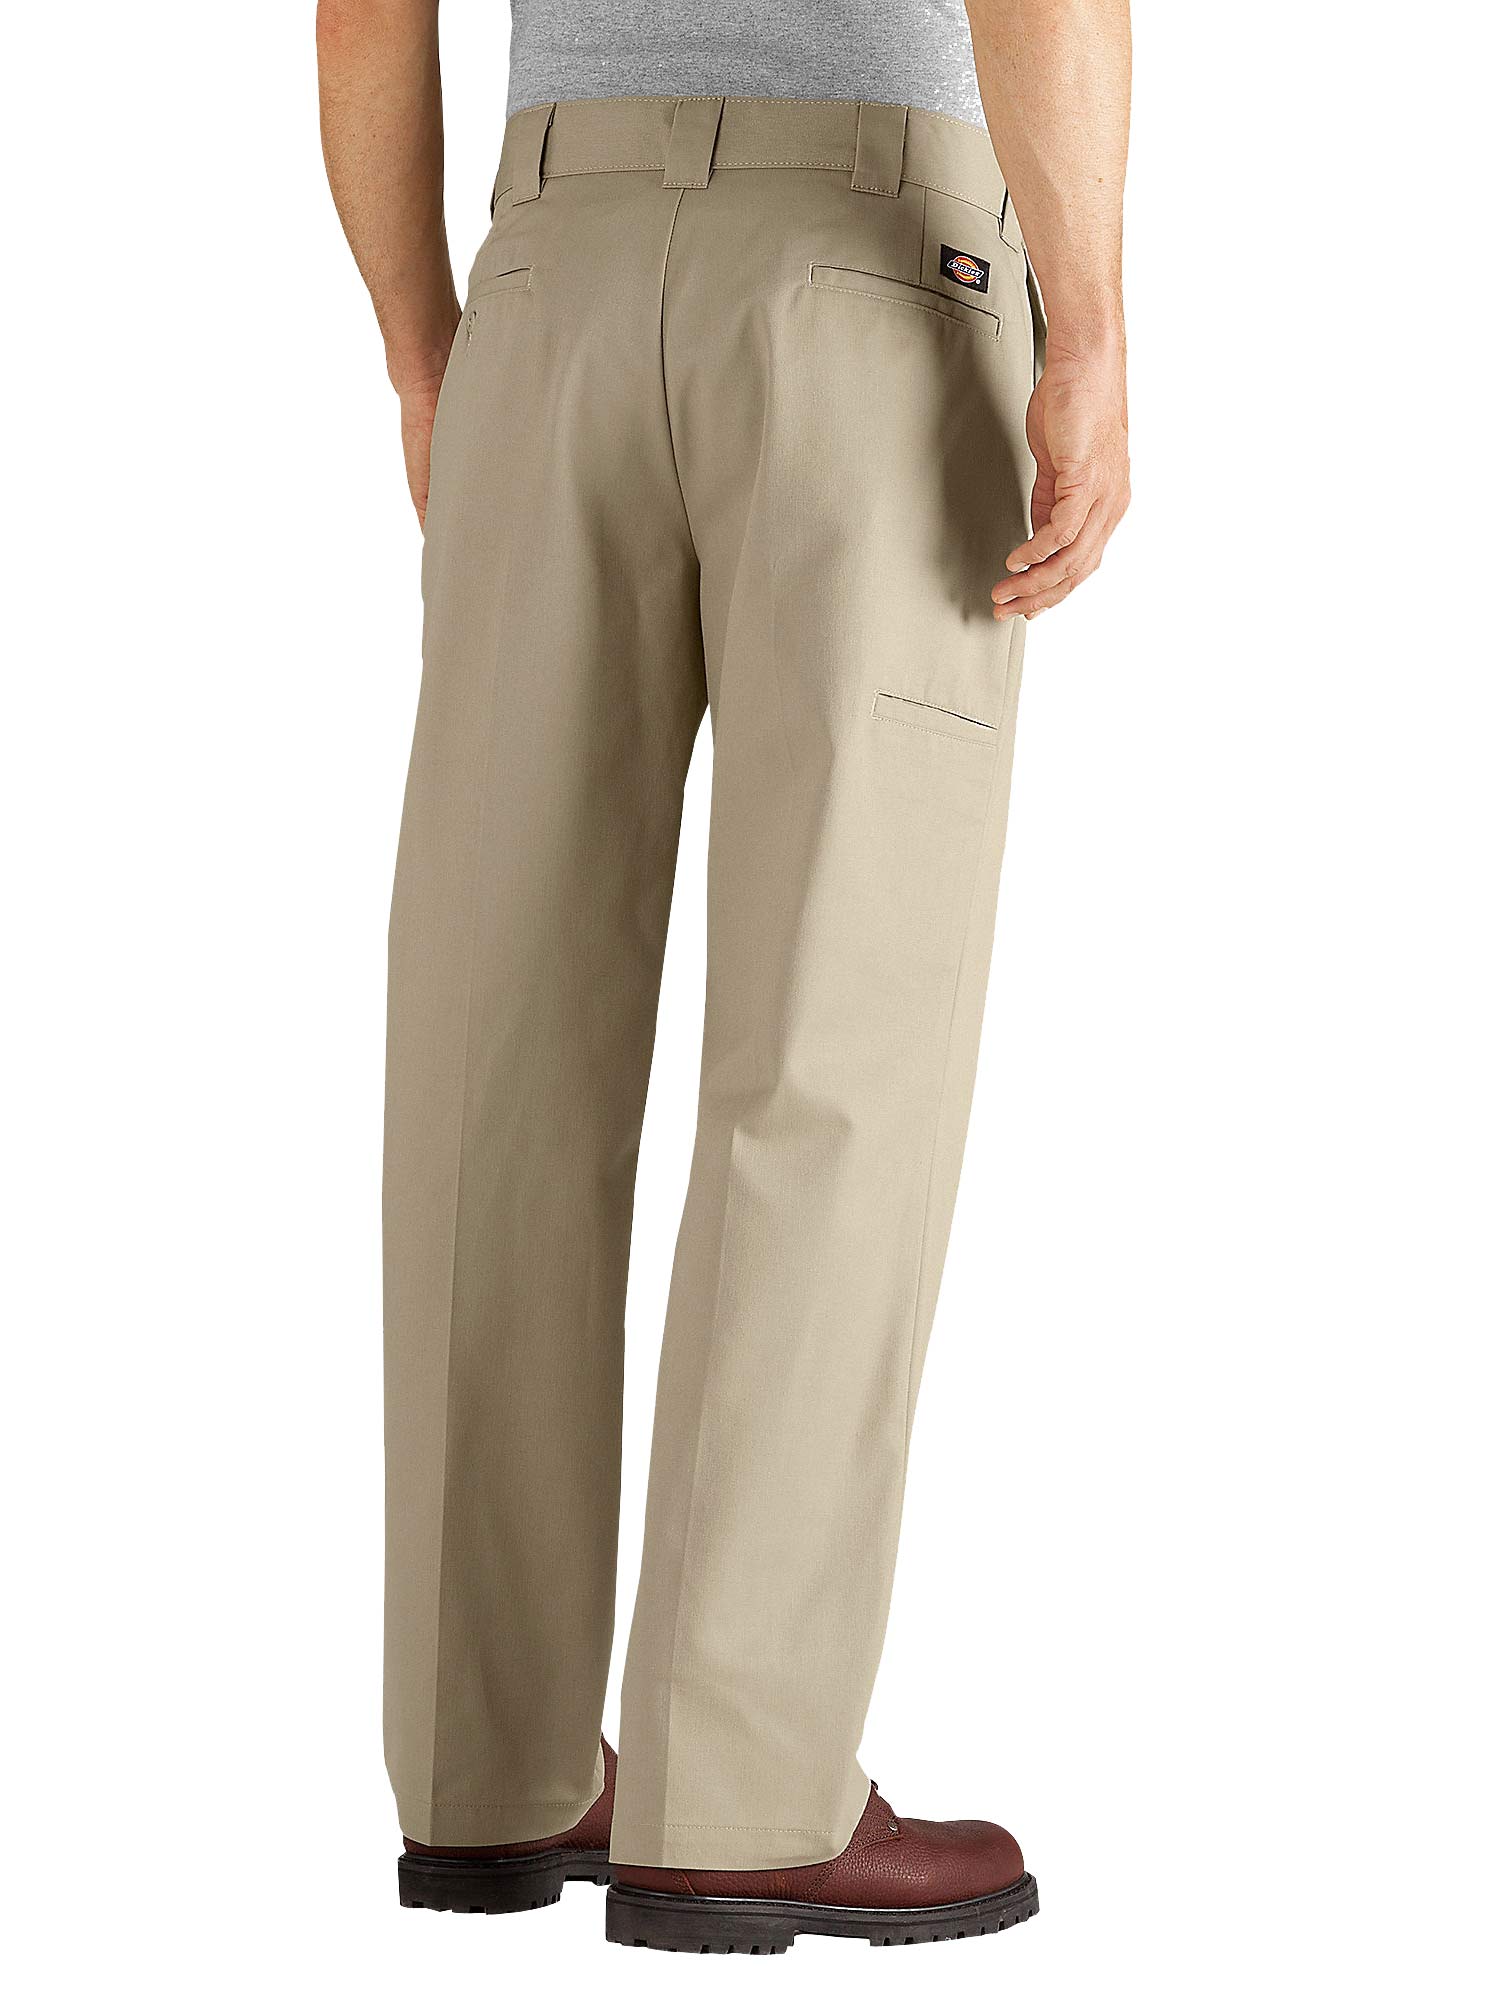 Dickies Relaxed Fit Comfort Waist Pant-Flex Fabric - WP824